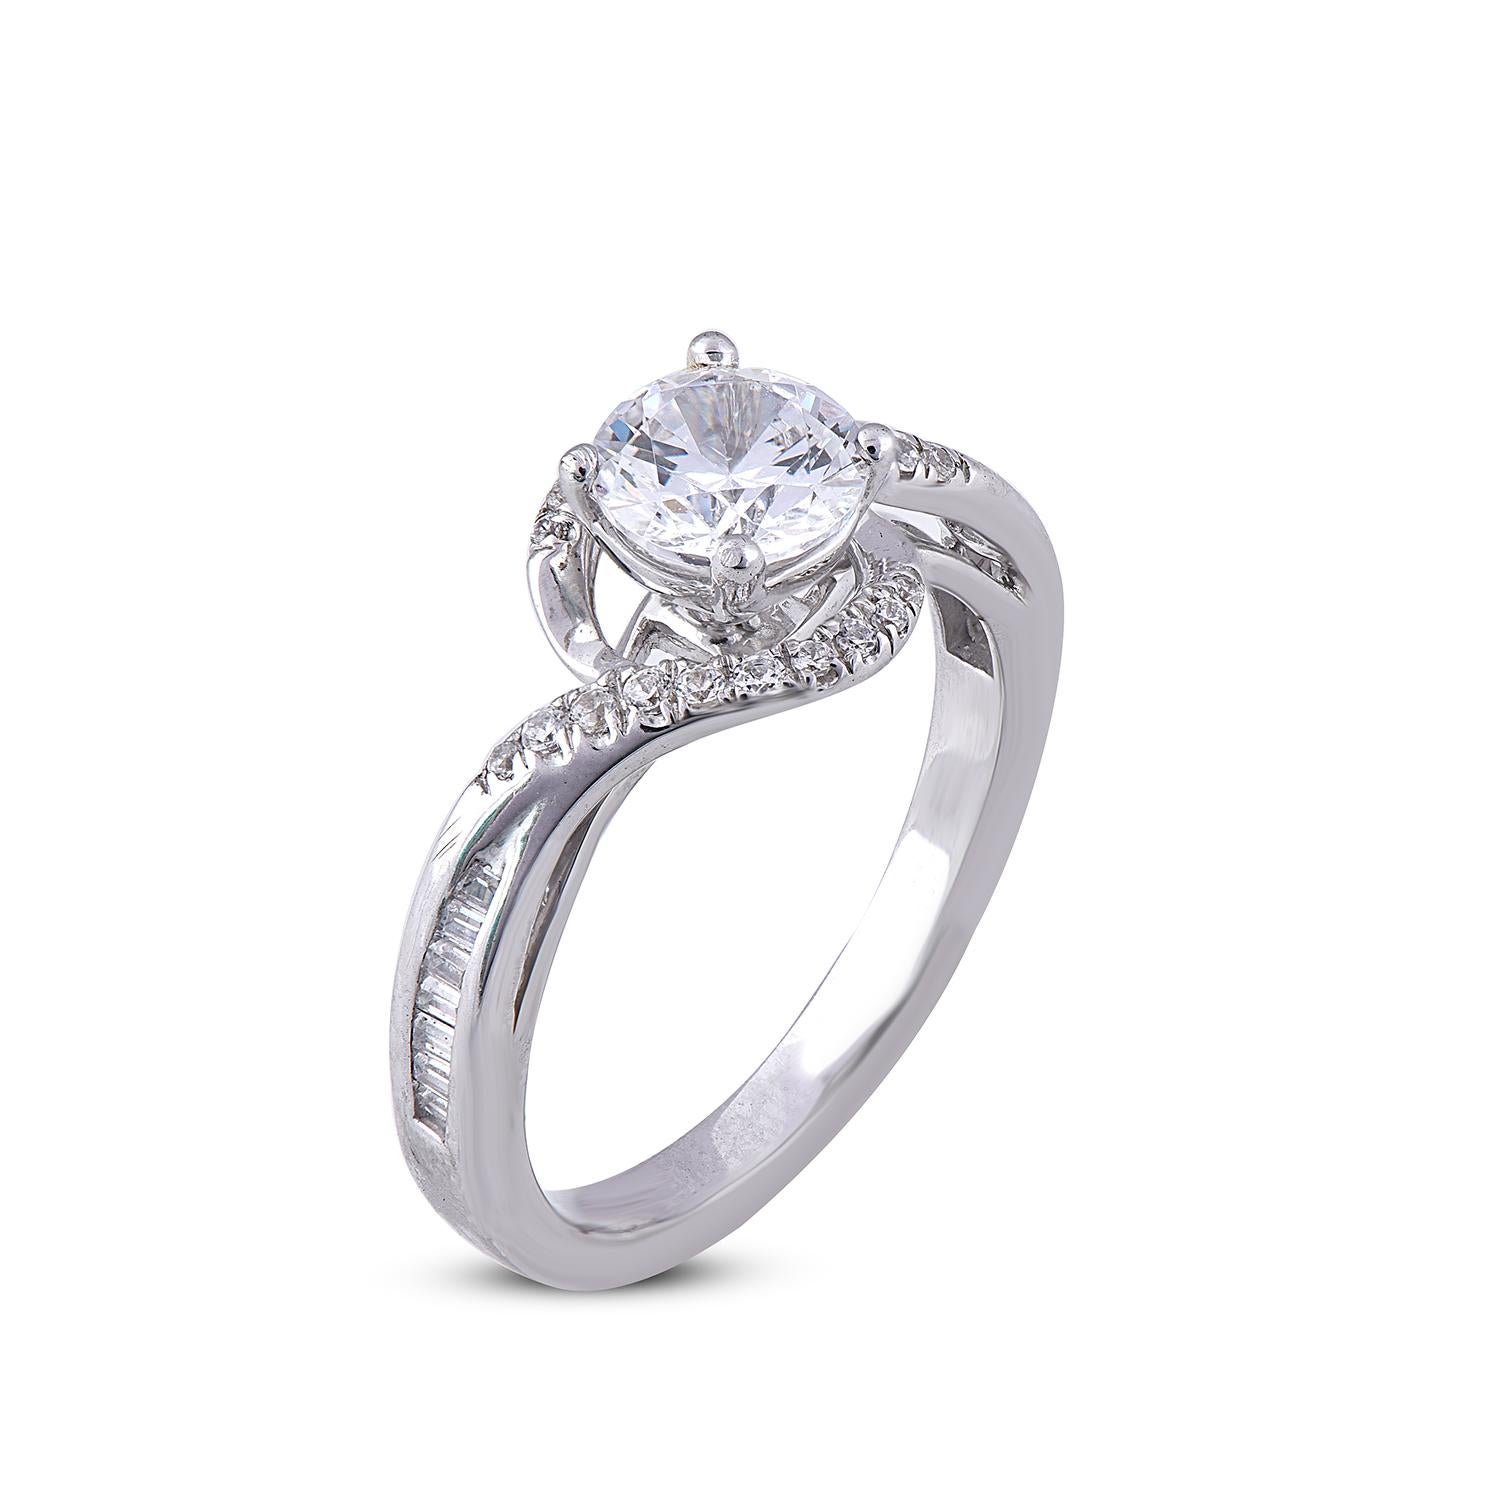 This engagement ring features in 18 Karat white gold with 1.00 ct of centre stone and 0.25 ct shank lined diamonds is beautifully designed and studded with 20 round and 16 Baguette diamond set in prong and channel setting. We only use natural, 100%